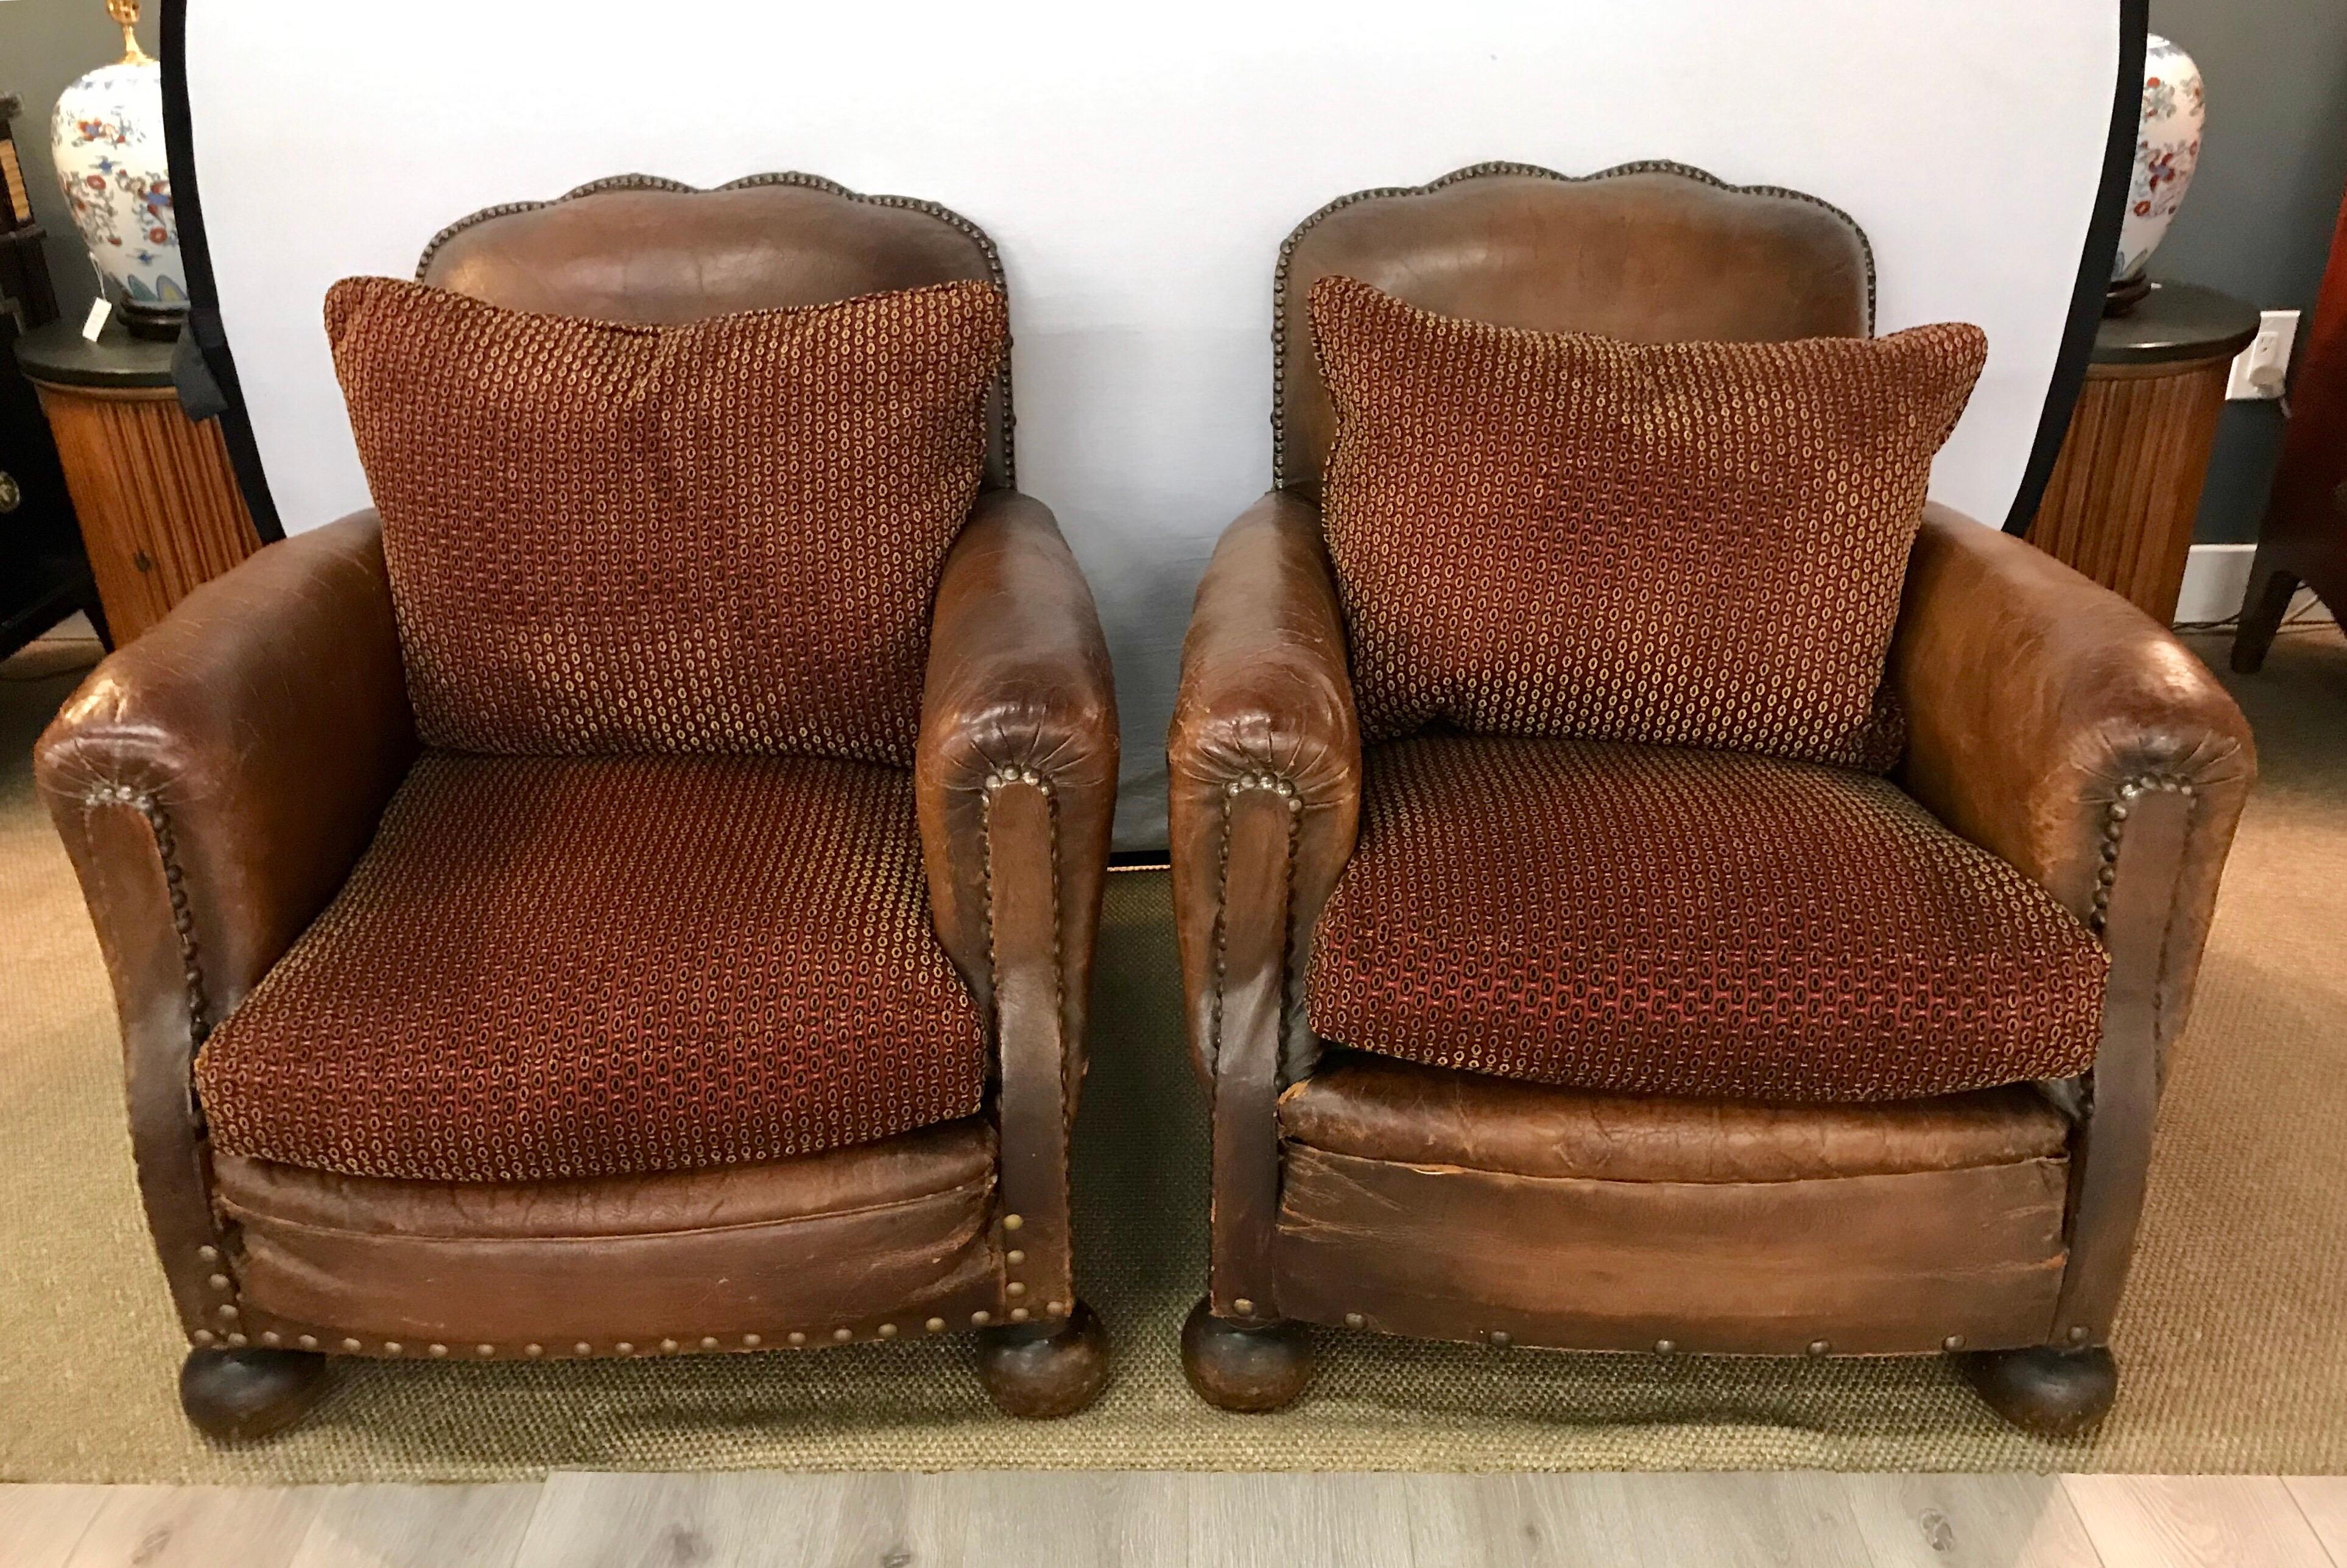 Distressed in a most extraordinary way! Isn't is time to set your home apart? These chairs are antique leather chairs from France and are quite gorgeous.